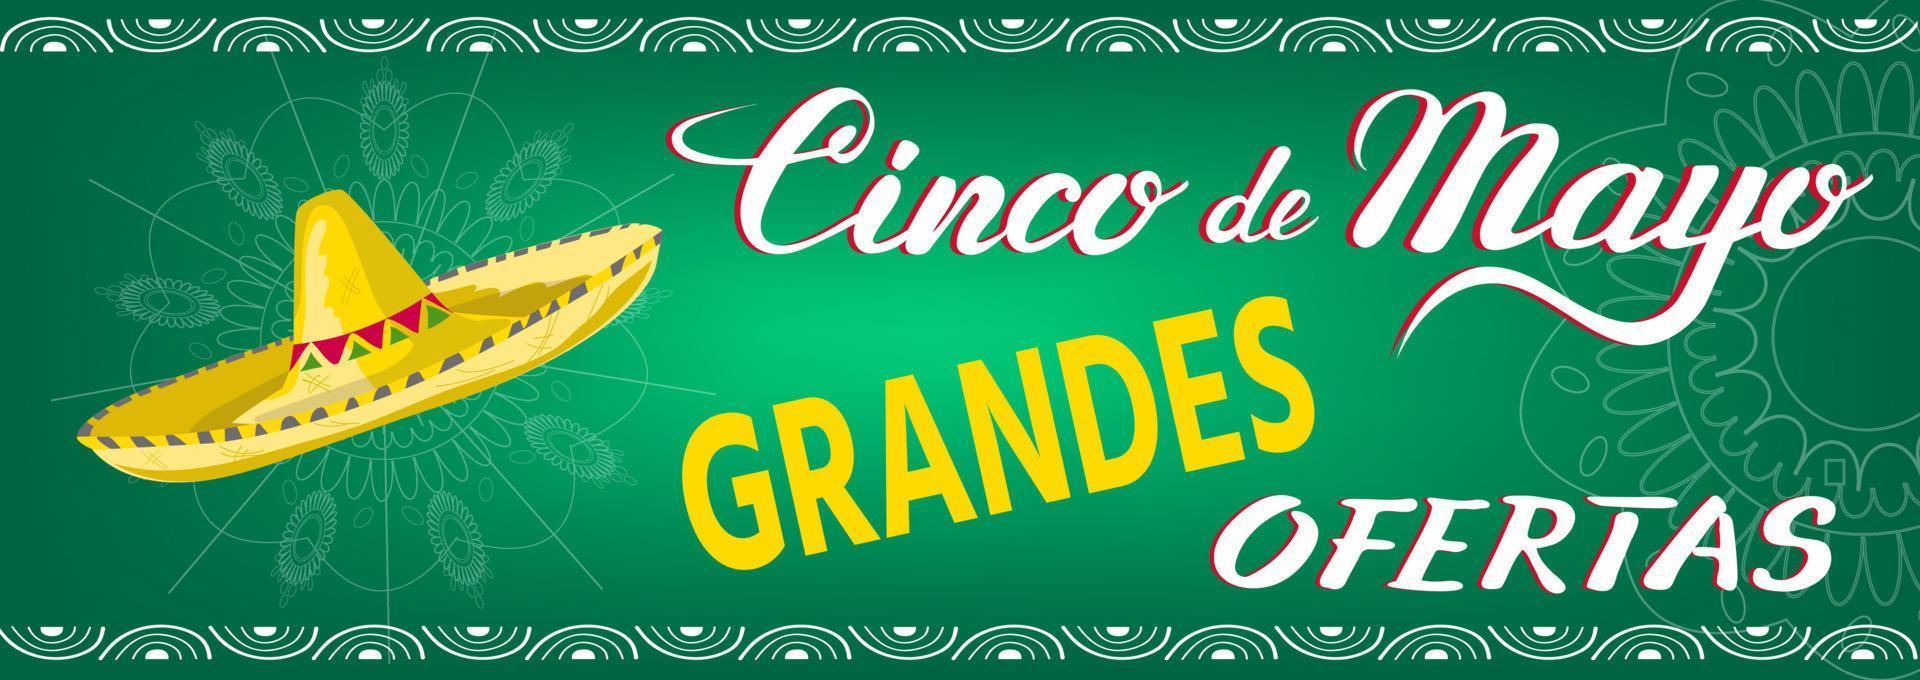 Cinco de Mayo Big Dicsounts, ornamental banner with sombrero and lettering for advertising offers and sale on Mexican festival vector